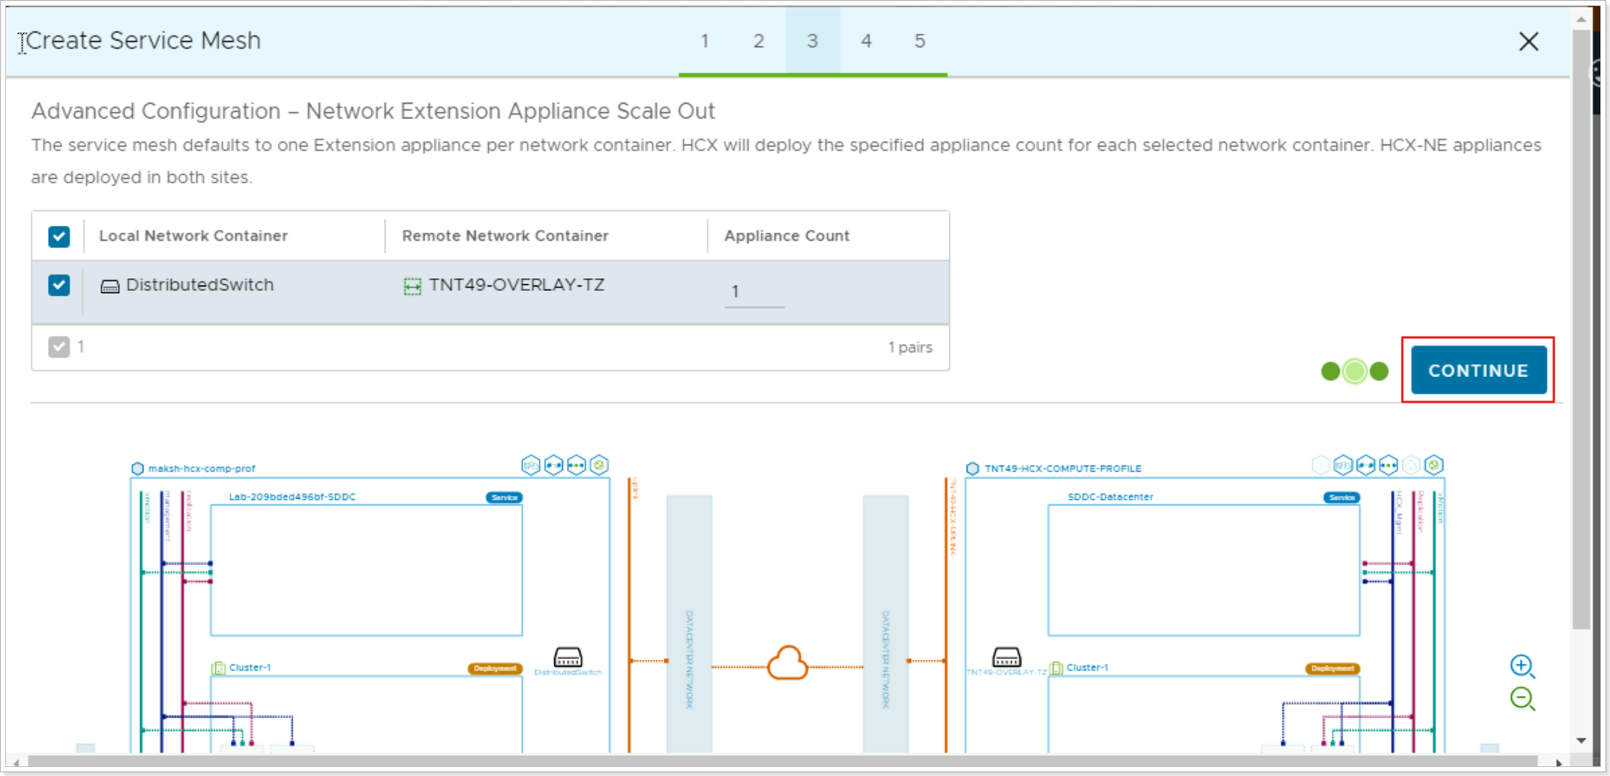 Advanced Configuration: Network Extension Appliance Scale Out